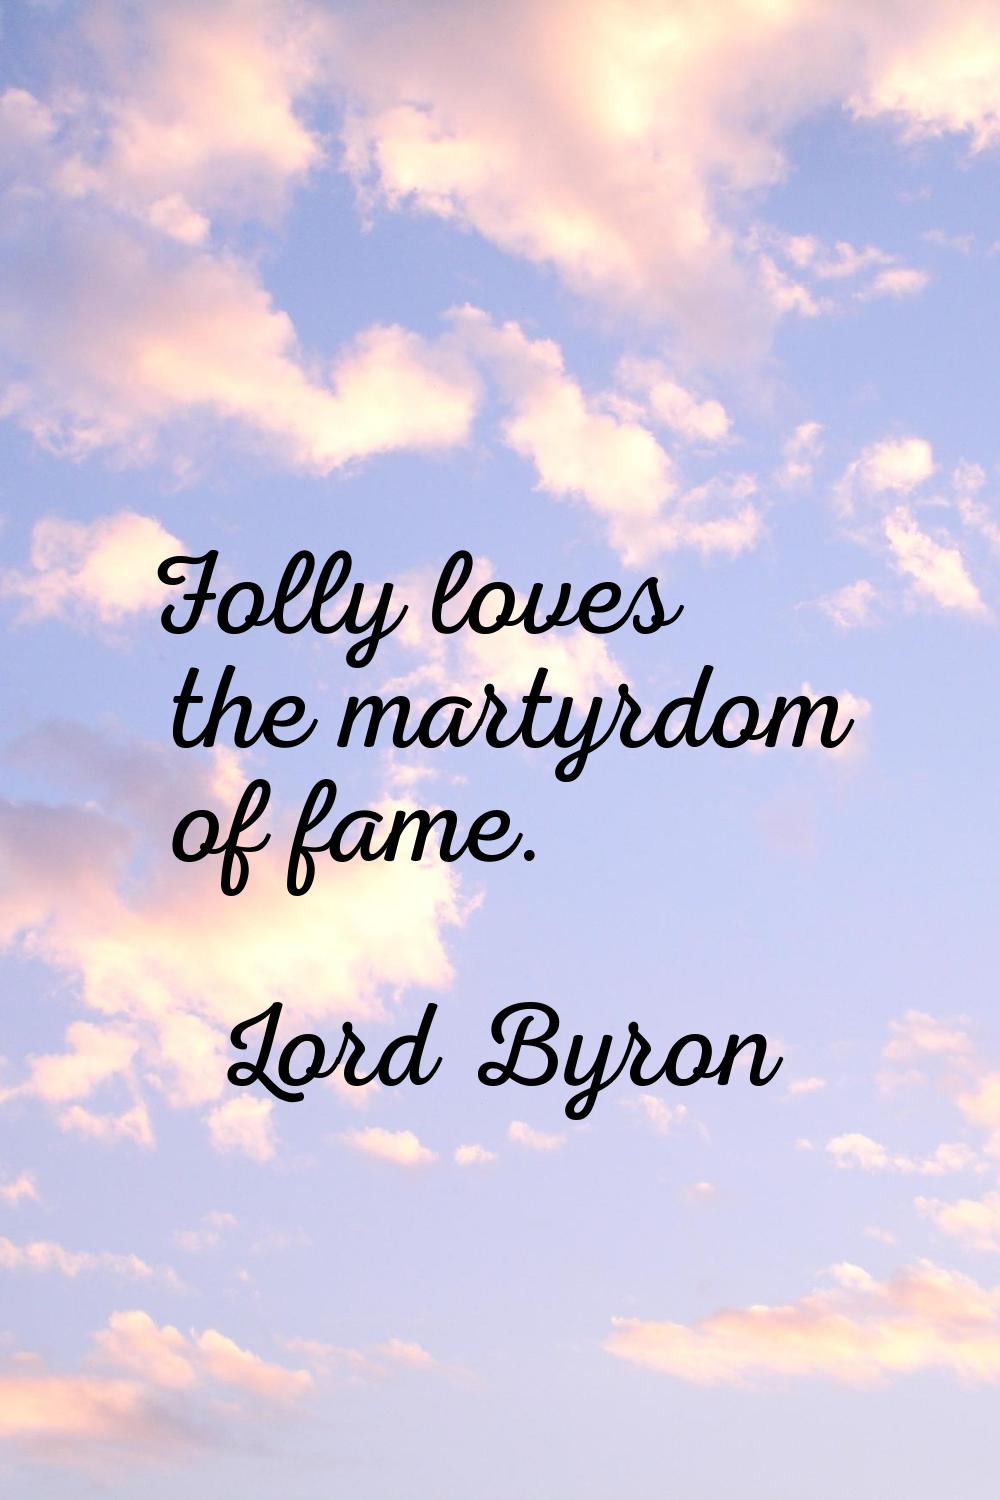 Folly loves the martyrdom of fame.